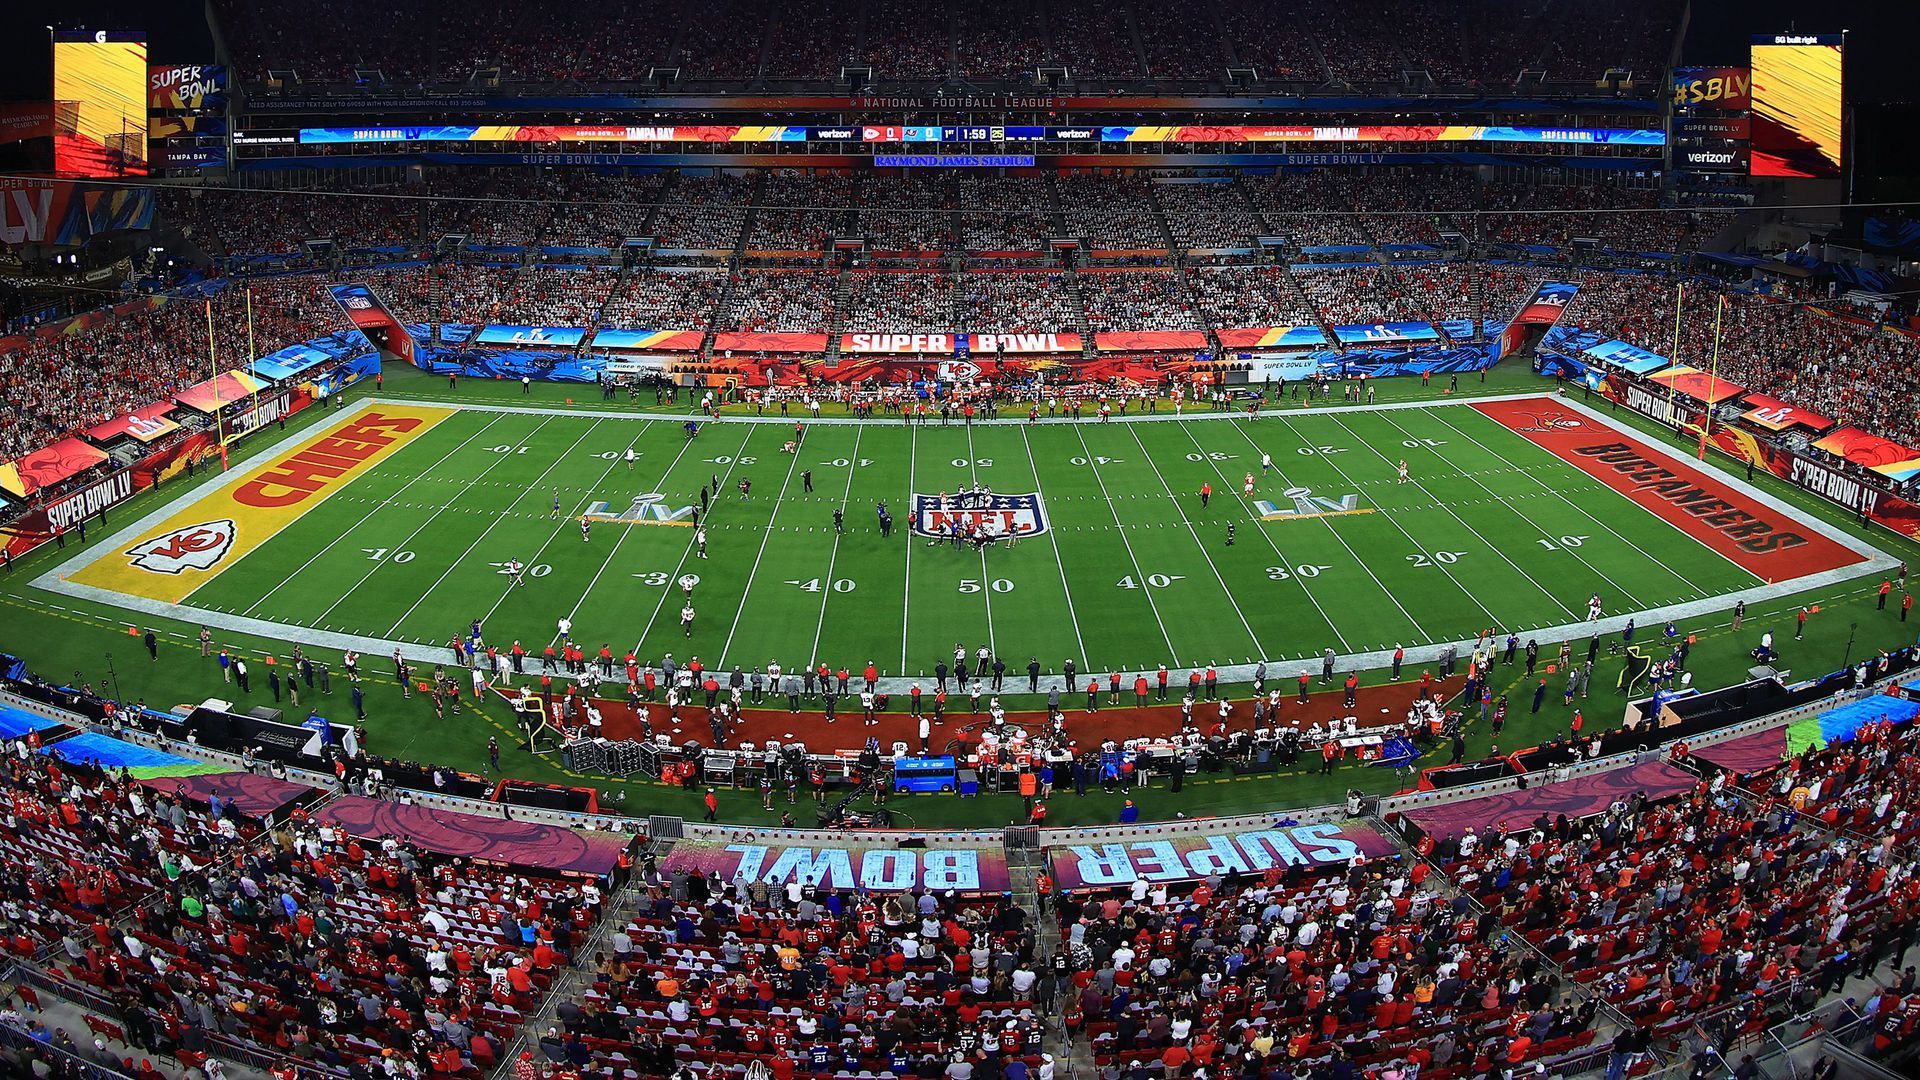 A general view of the stadium as the coin is flipped before Super Bowl LV between the Tampa Bay Buccaneers and the Kansas City Chiefs at Raymond James Stadium.